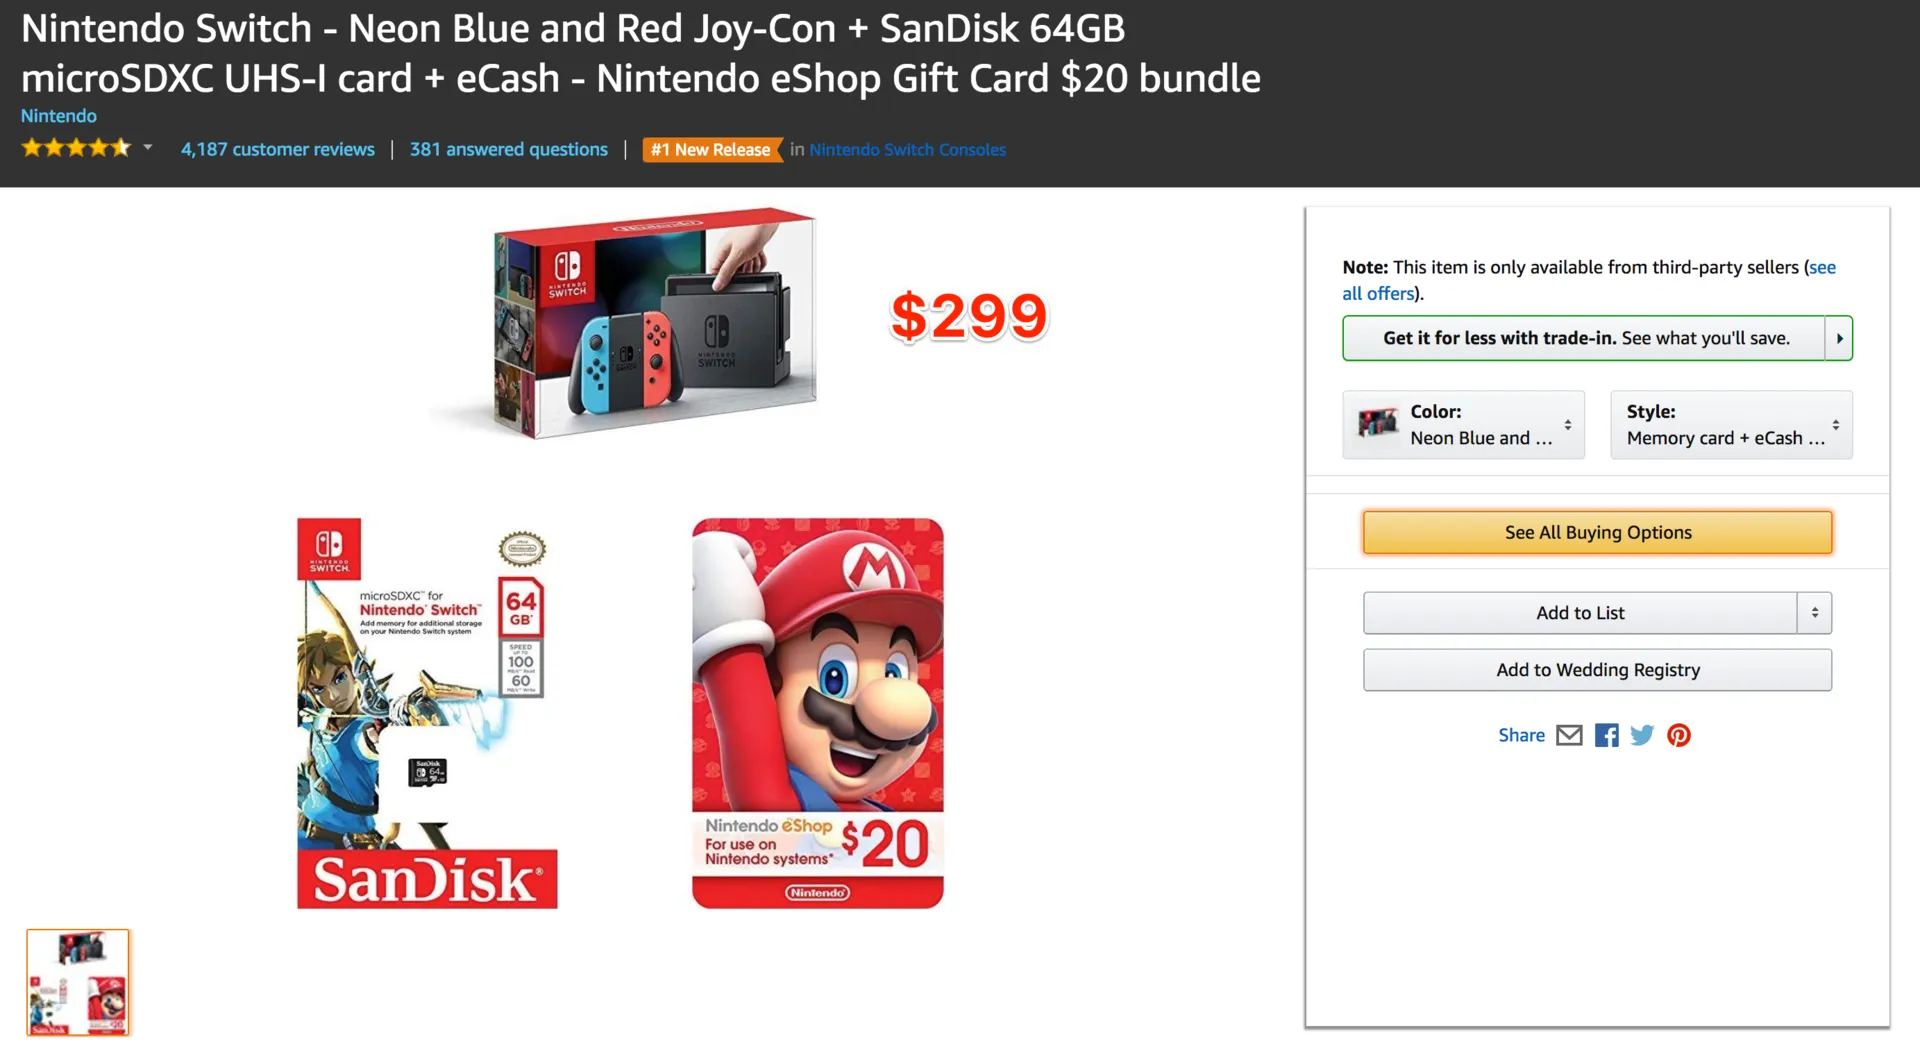 Nintendo Switch Deal on Prime Day - 64GB + $20 Game Credit for $299